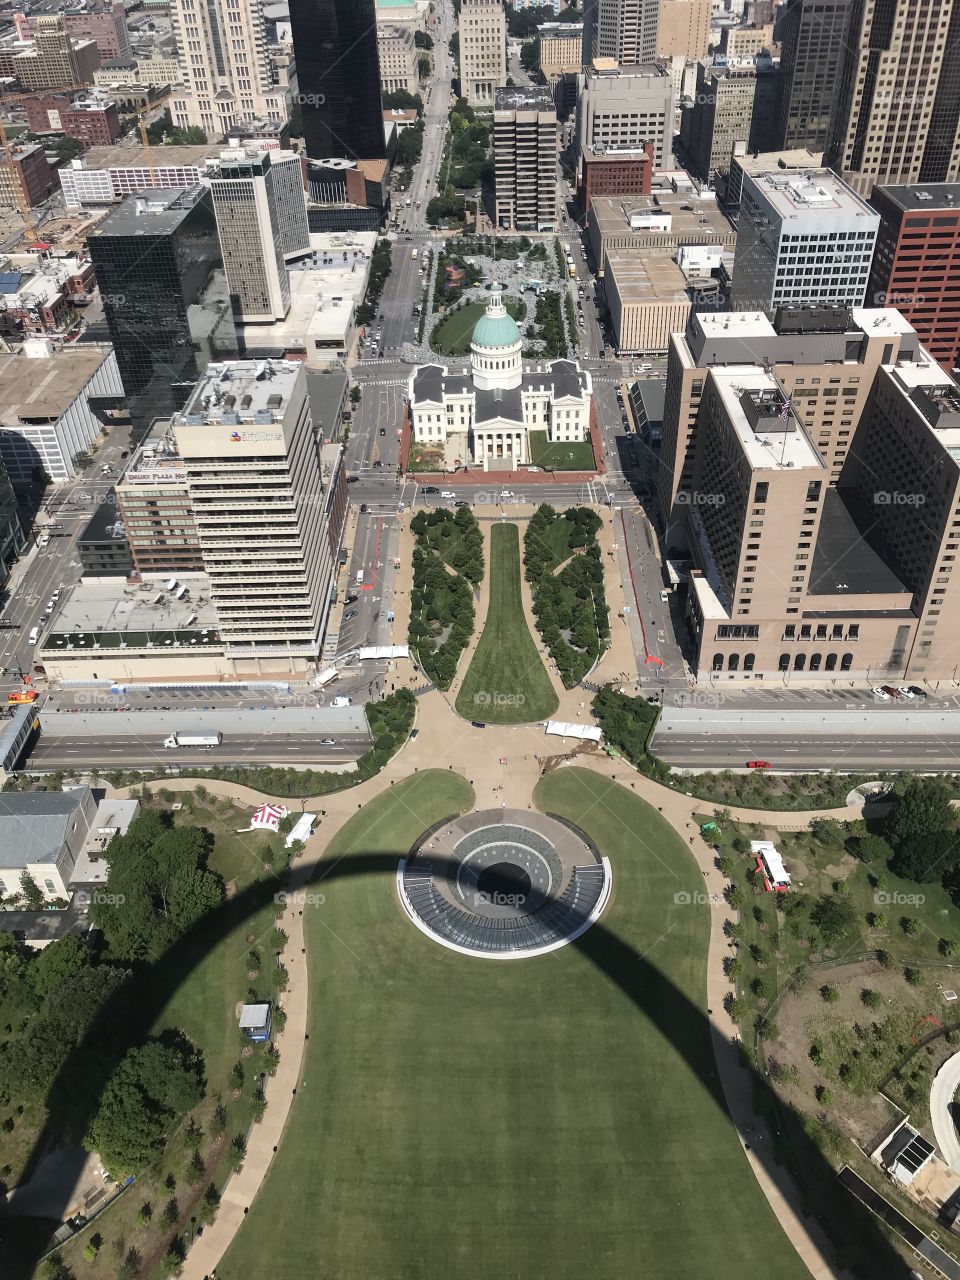 The Old Courthouse in St. Louis, from atop the Gateway Arch monument, with a shadow of the Arch in the foreground